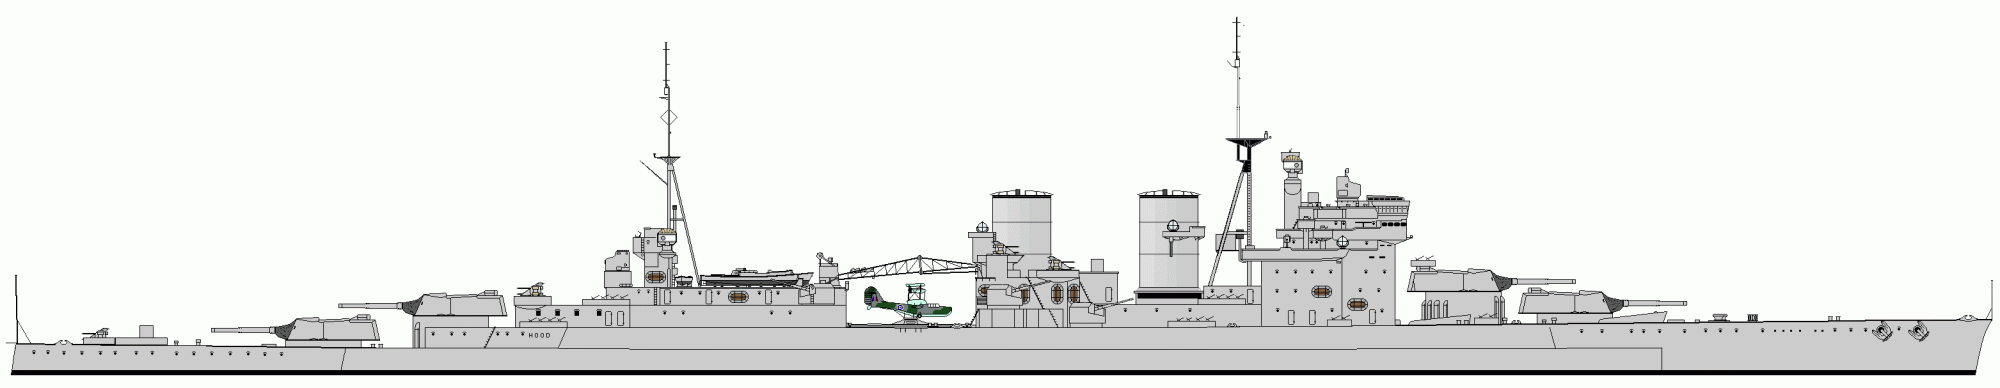 The Planned Refit for HMS Hood